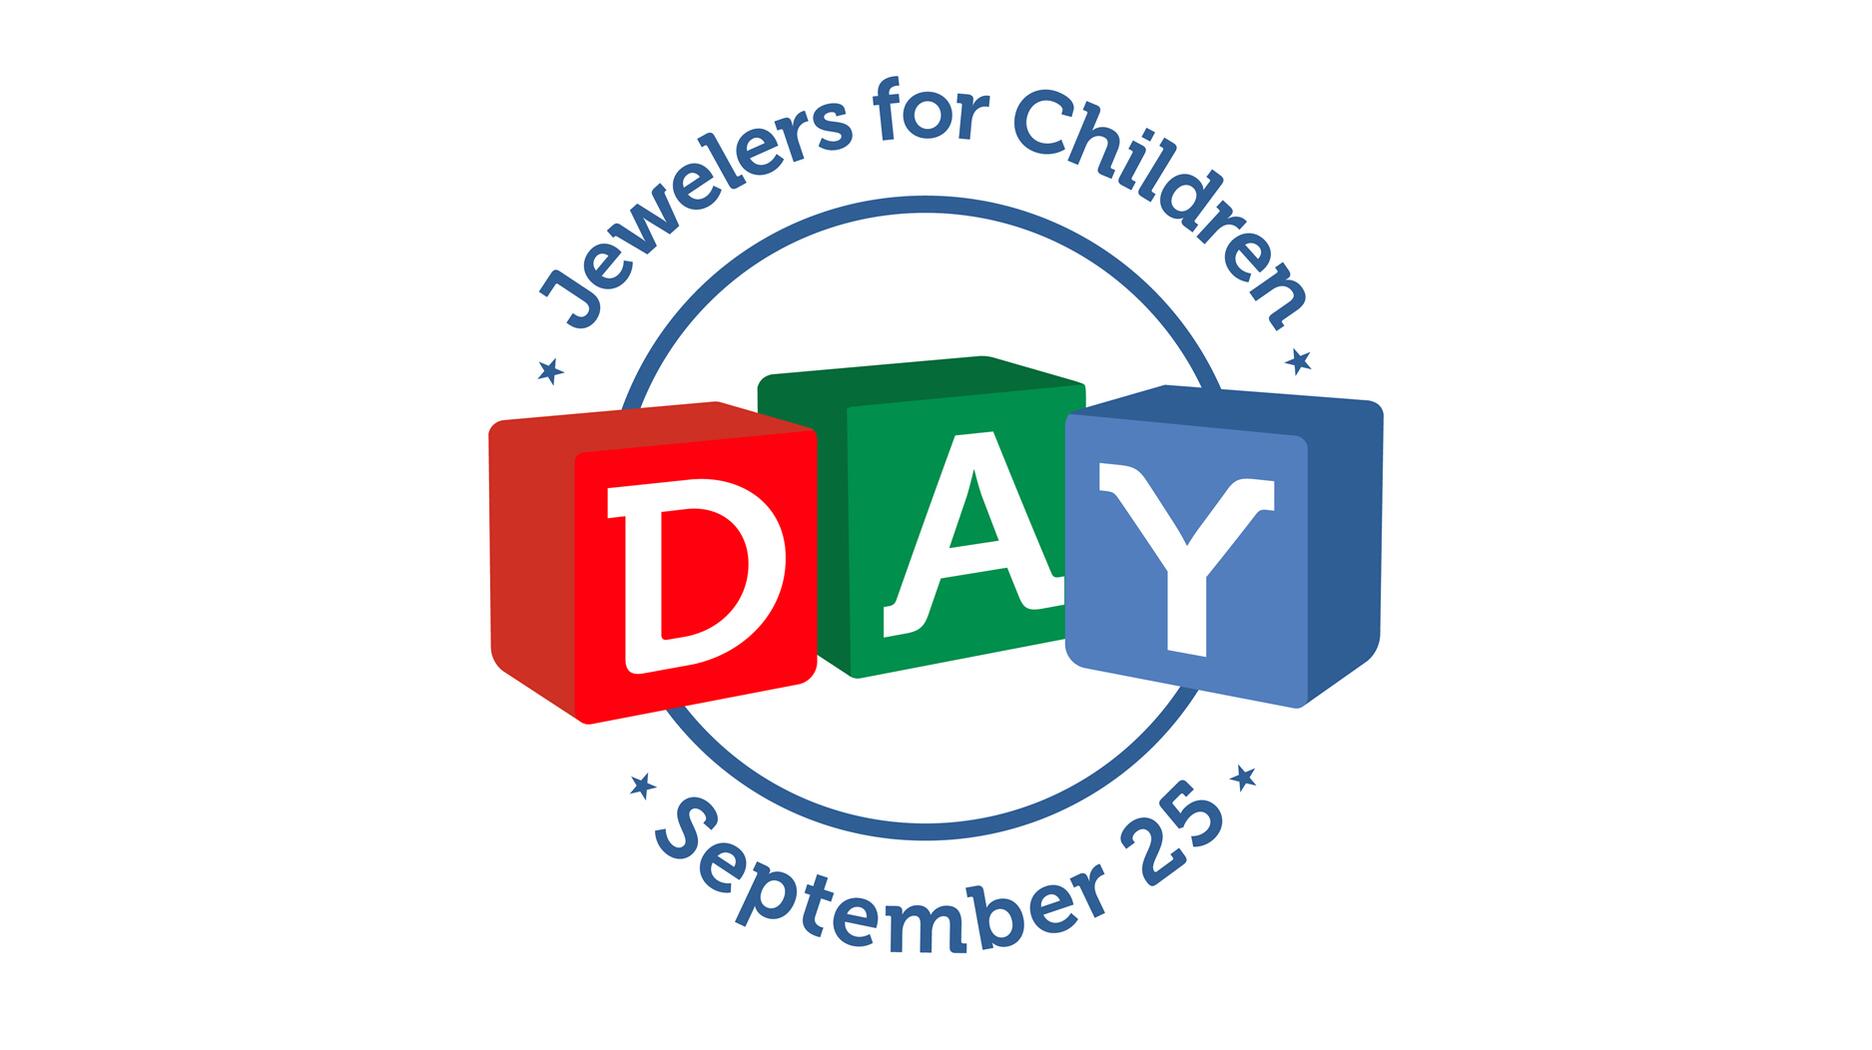 Jewelers for Children Announces Fourth Annual JFC Day